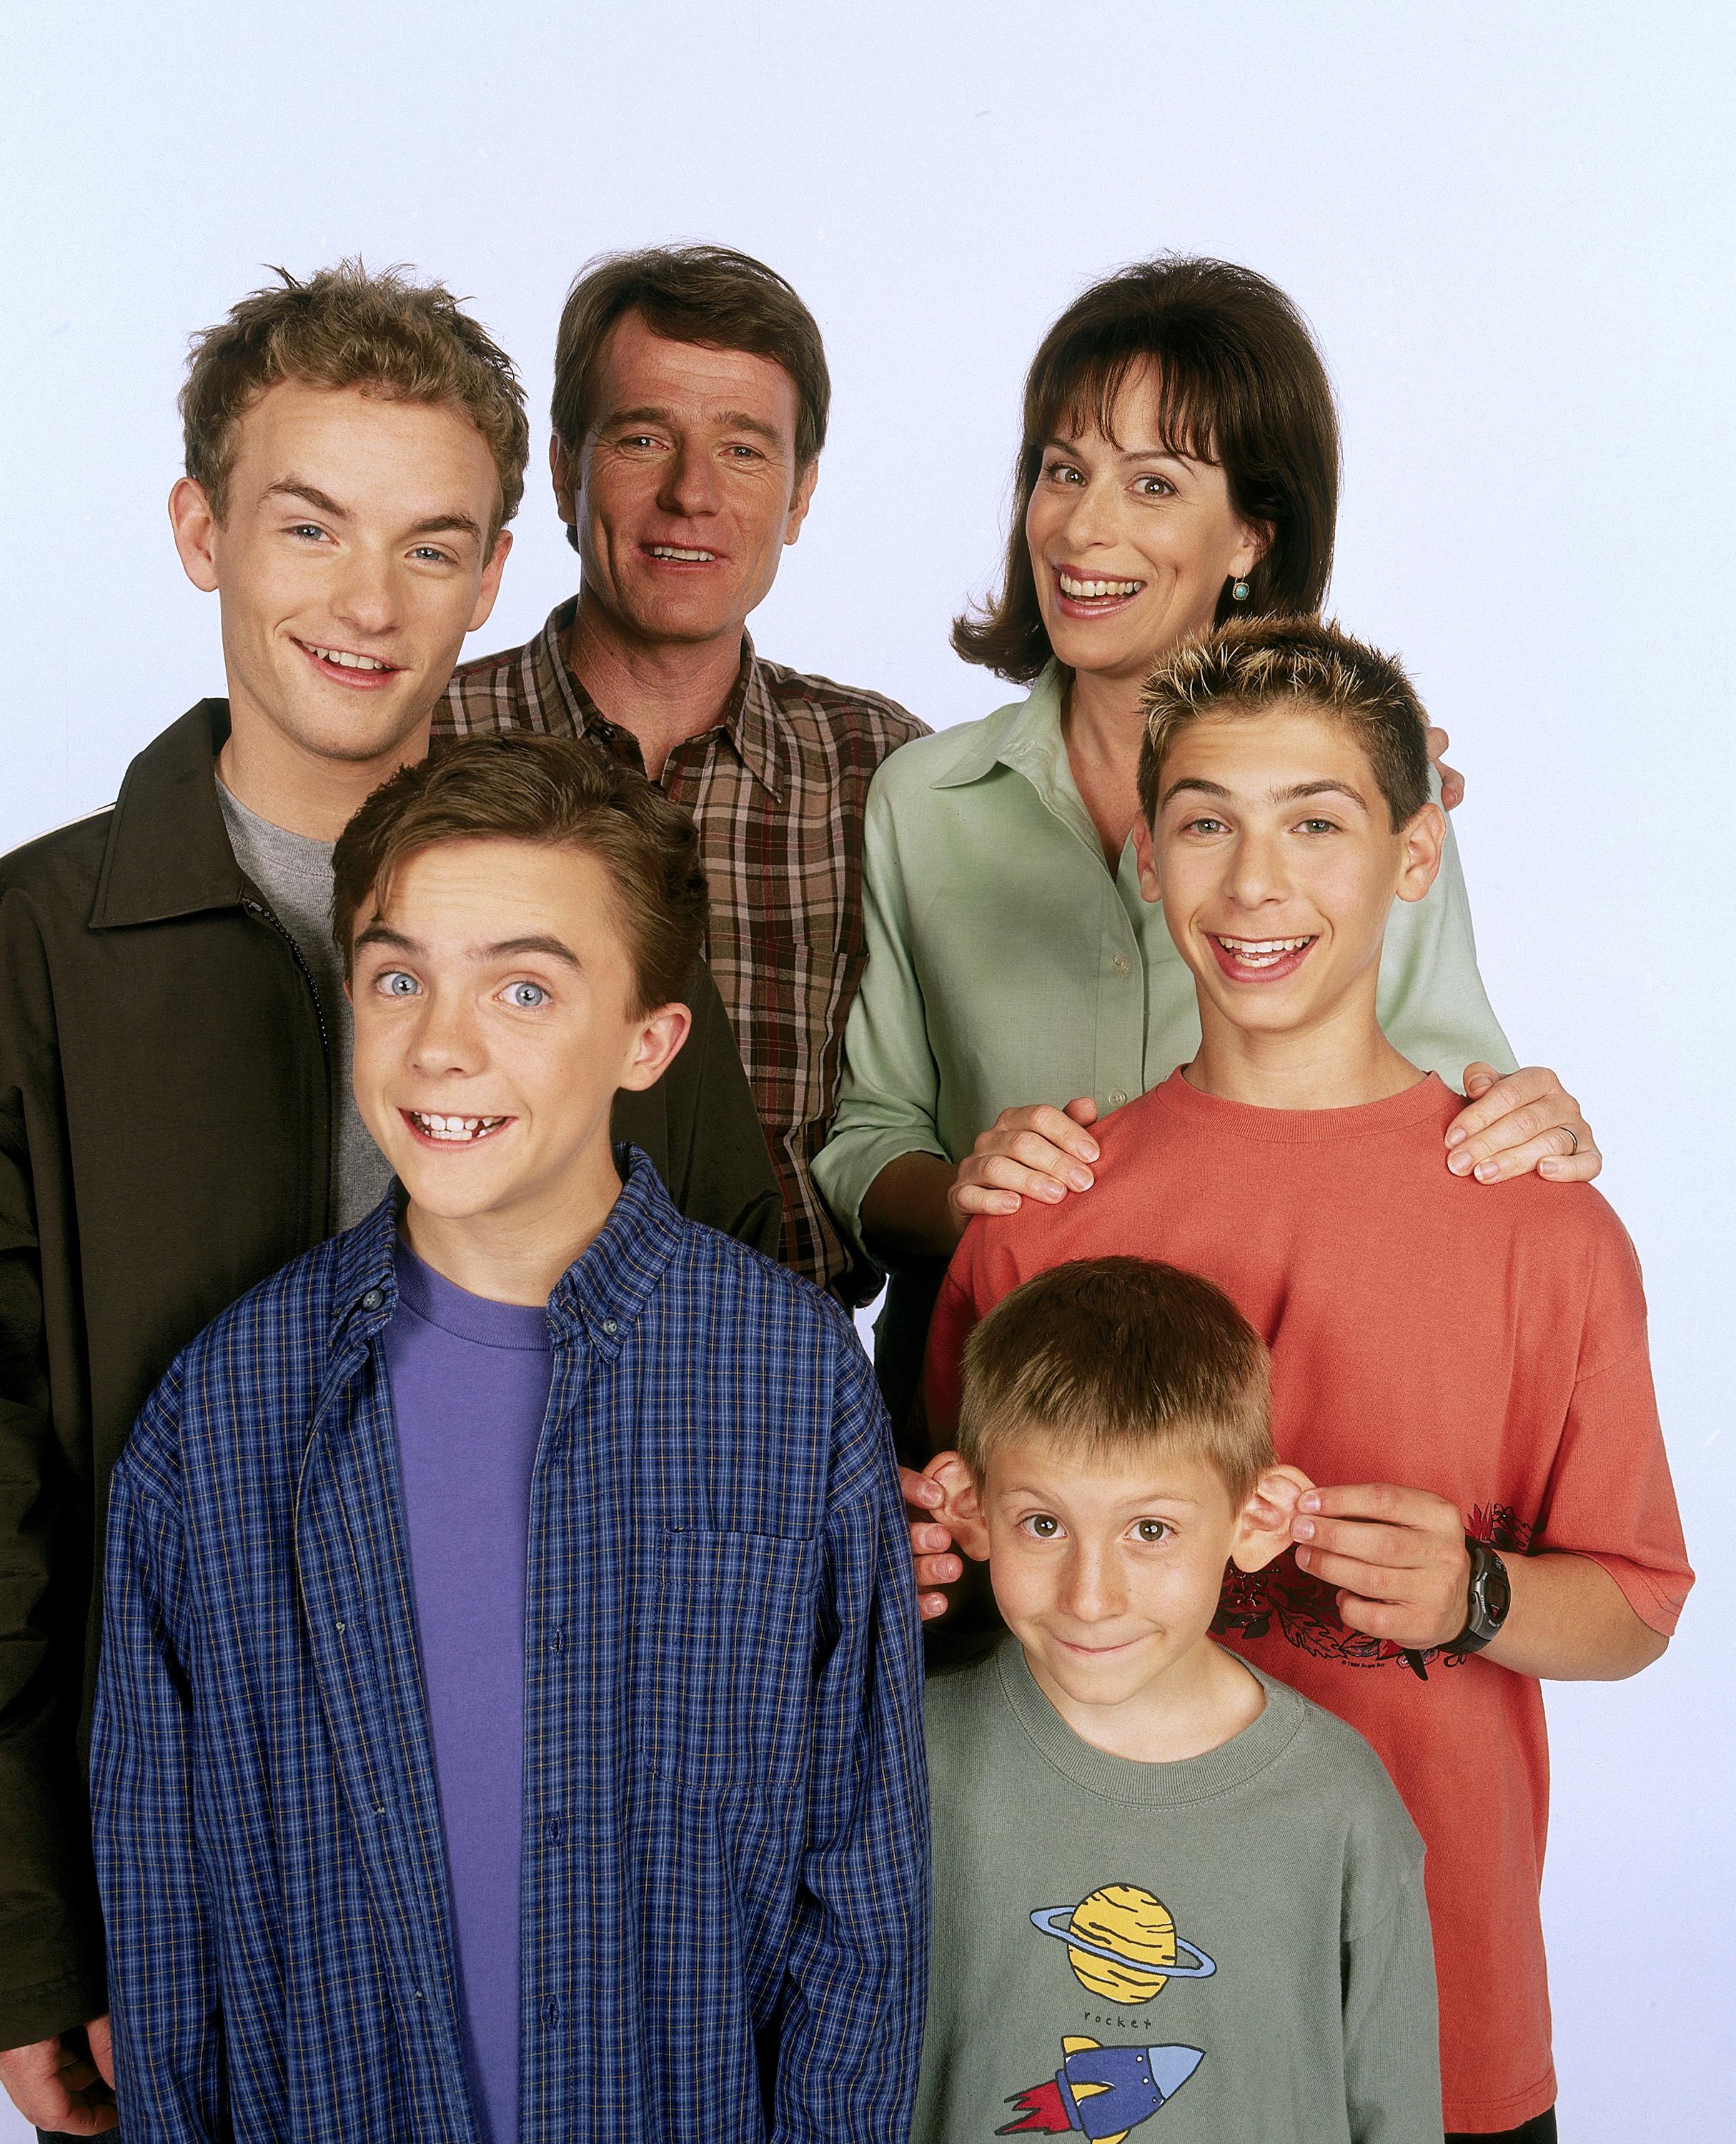 Frankie starred on Malcolm in the Middle